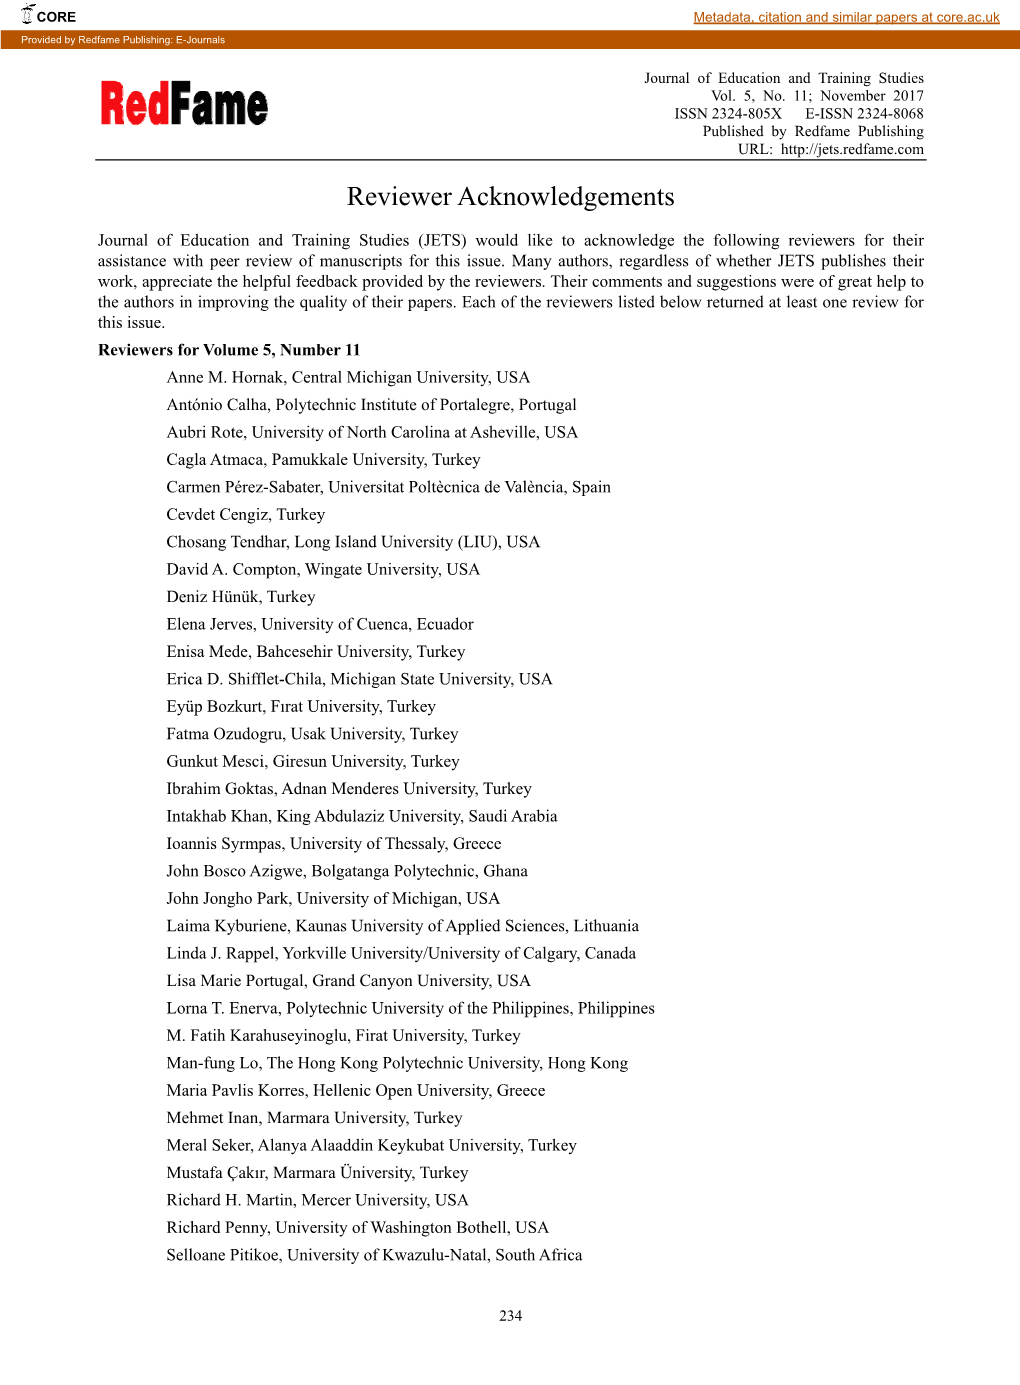 Reviewer Acknowledgements